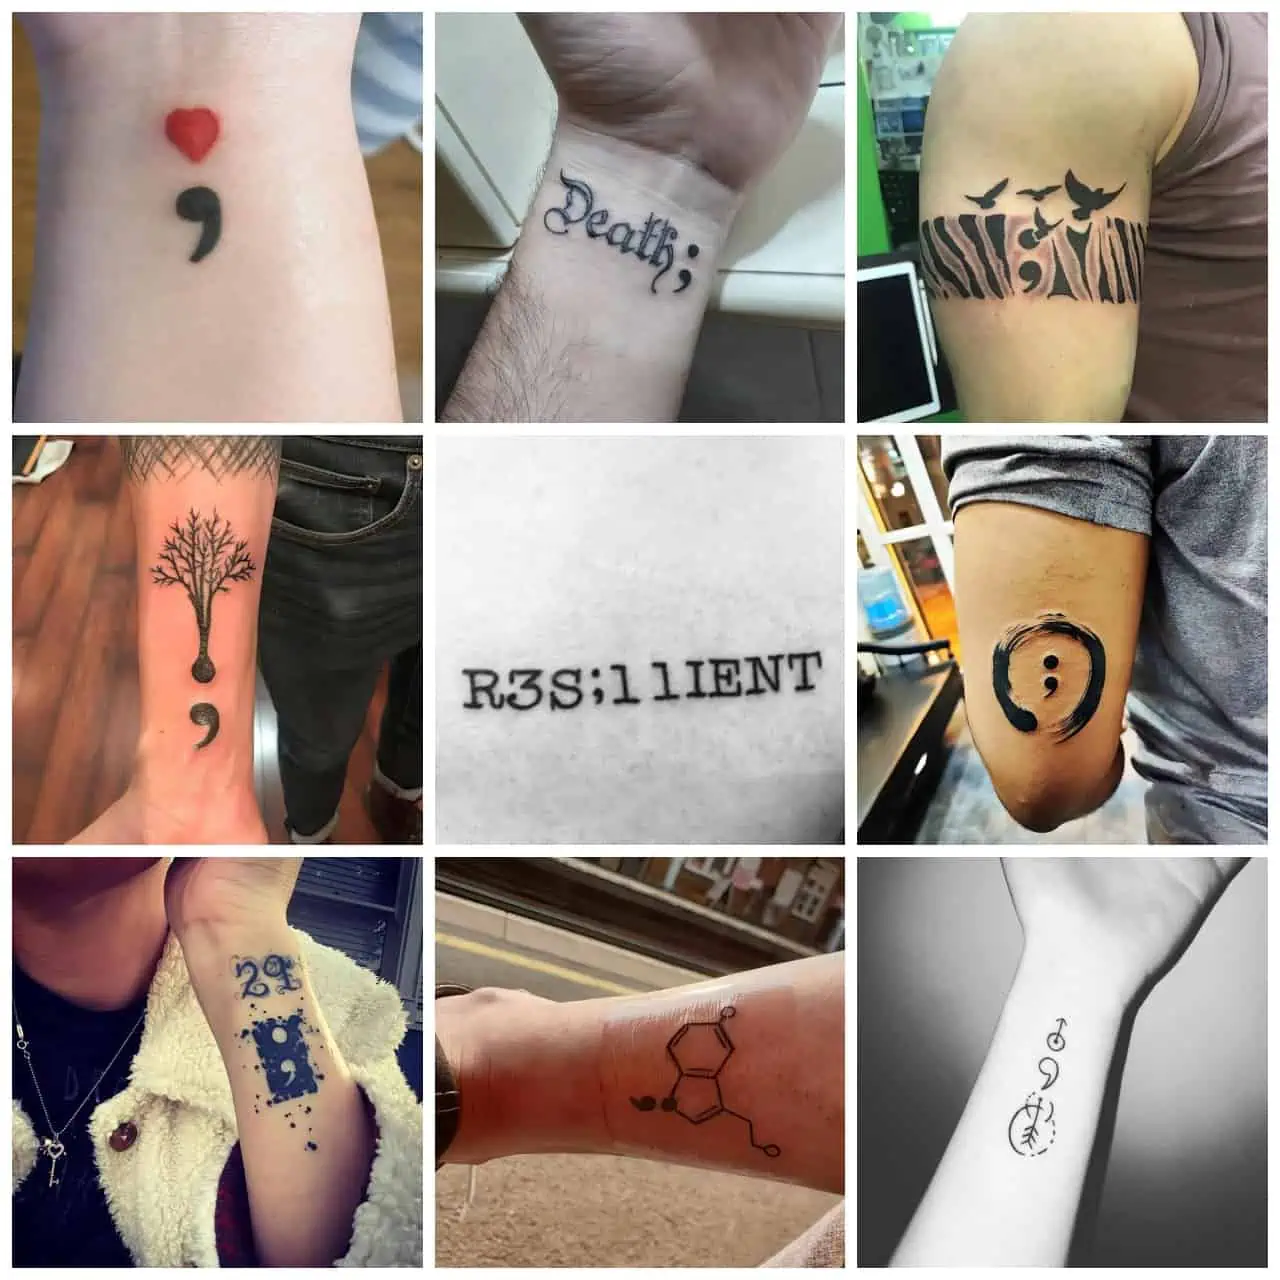 Black Canvas Tattoo Studio - A semicolon tattoo is a tattoo of the semicolon  punctuation mark (;) used as a message of affirmation and solidarity  against suicide, depression, addiction, and other mental